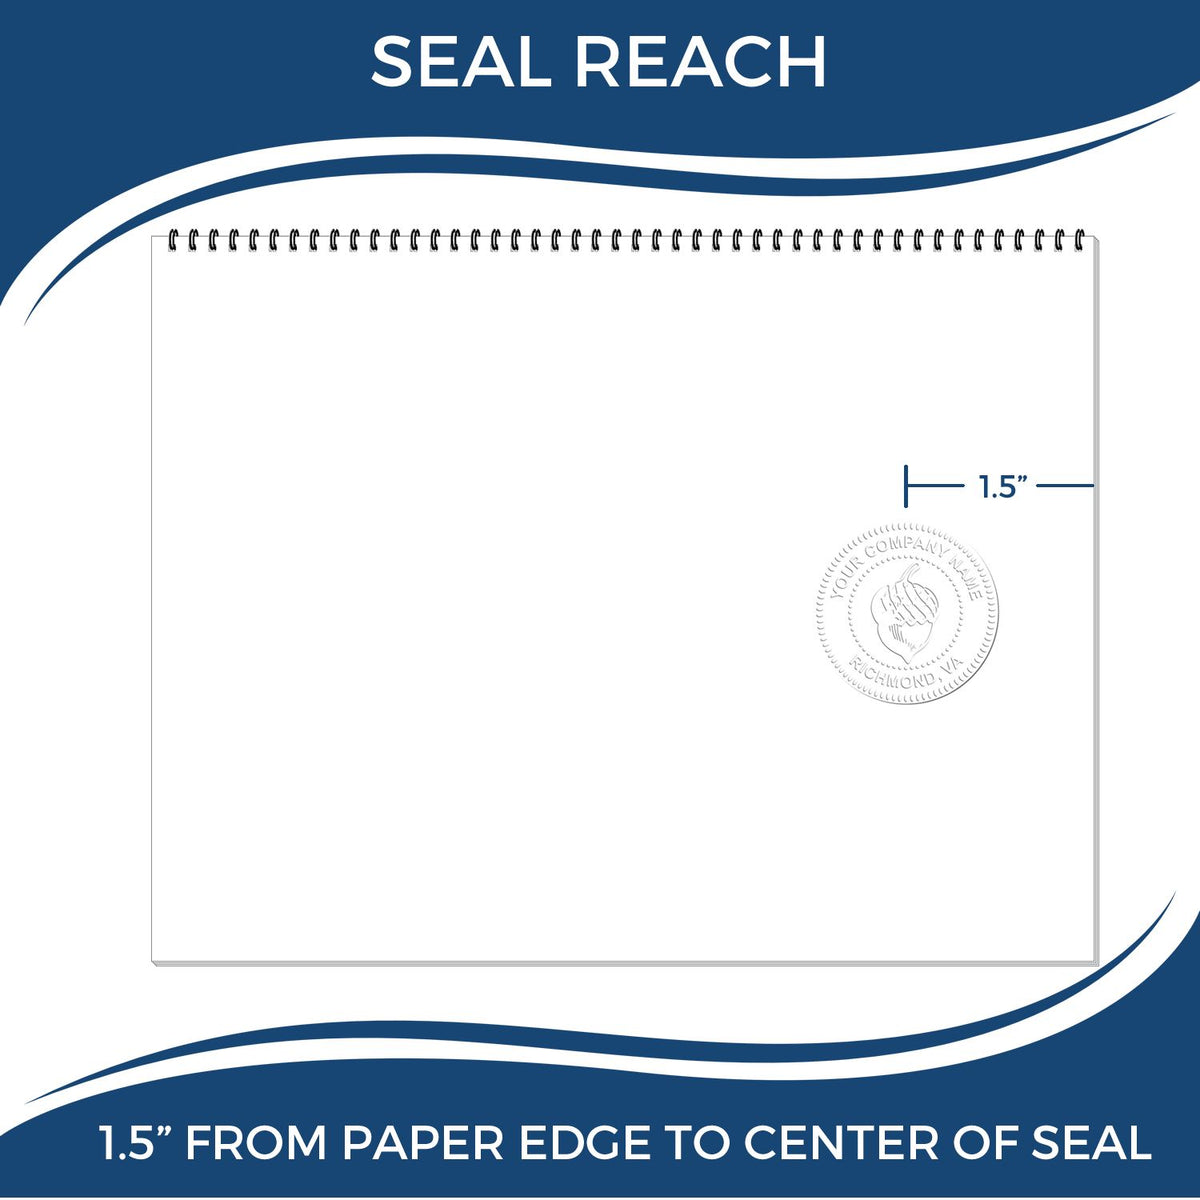 An infographic showing the seal reach which is represented by a ruler and a miniature seal image of the Gift New Jersey Engineer Seal